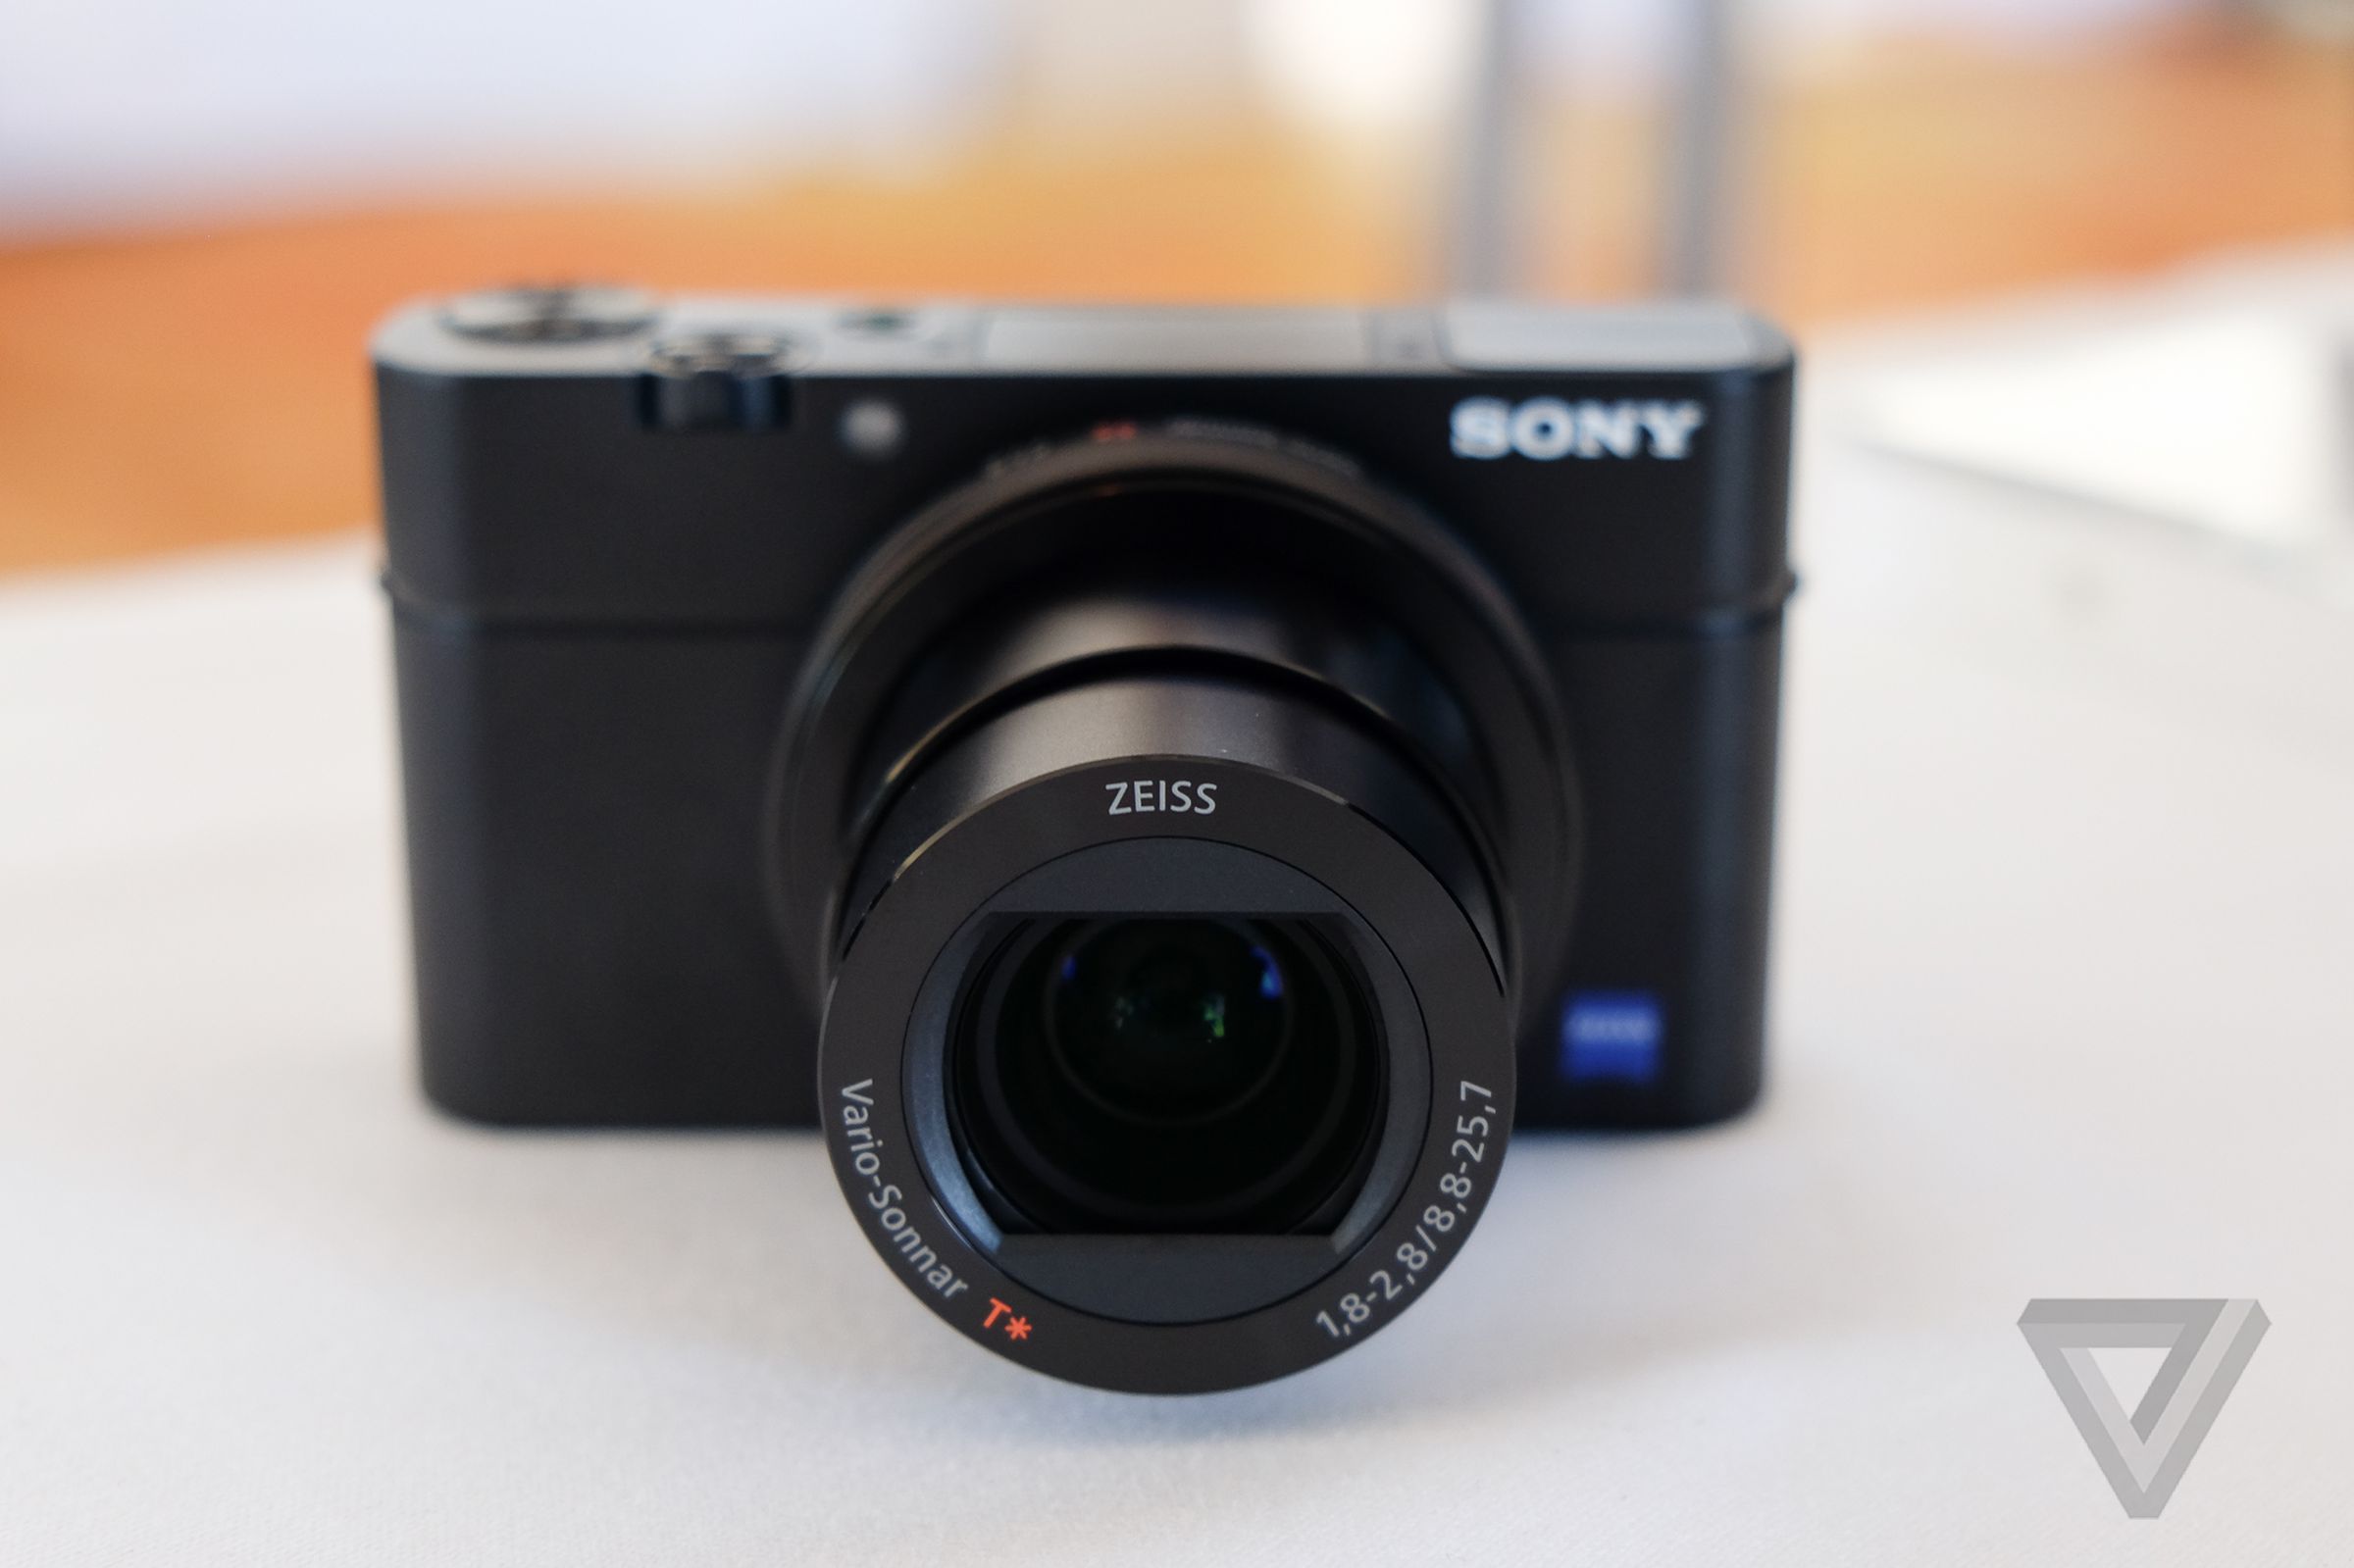 Sony RX100 IV, RX10 II, and A7R II pictures